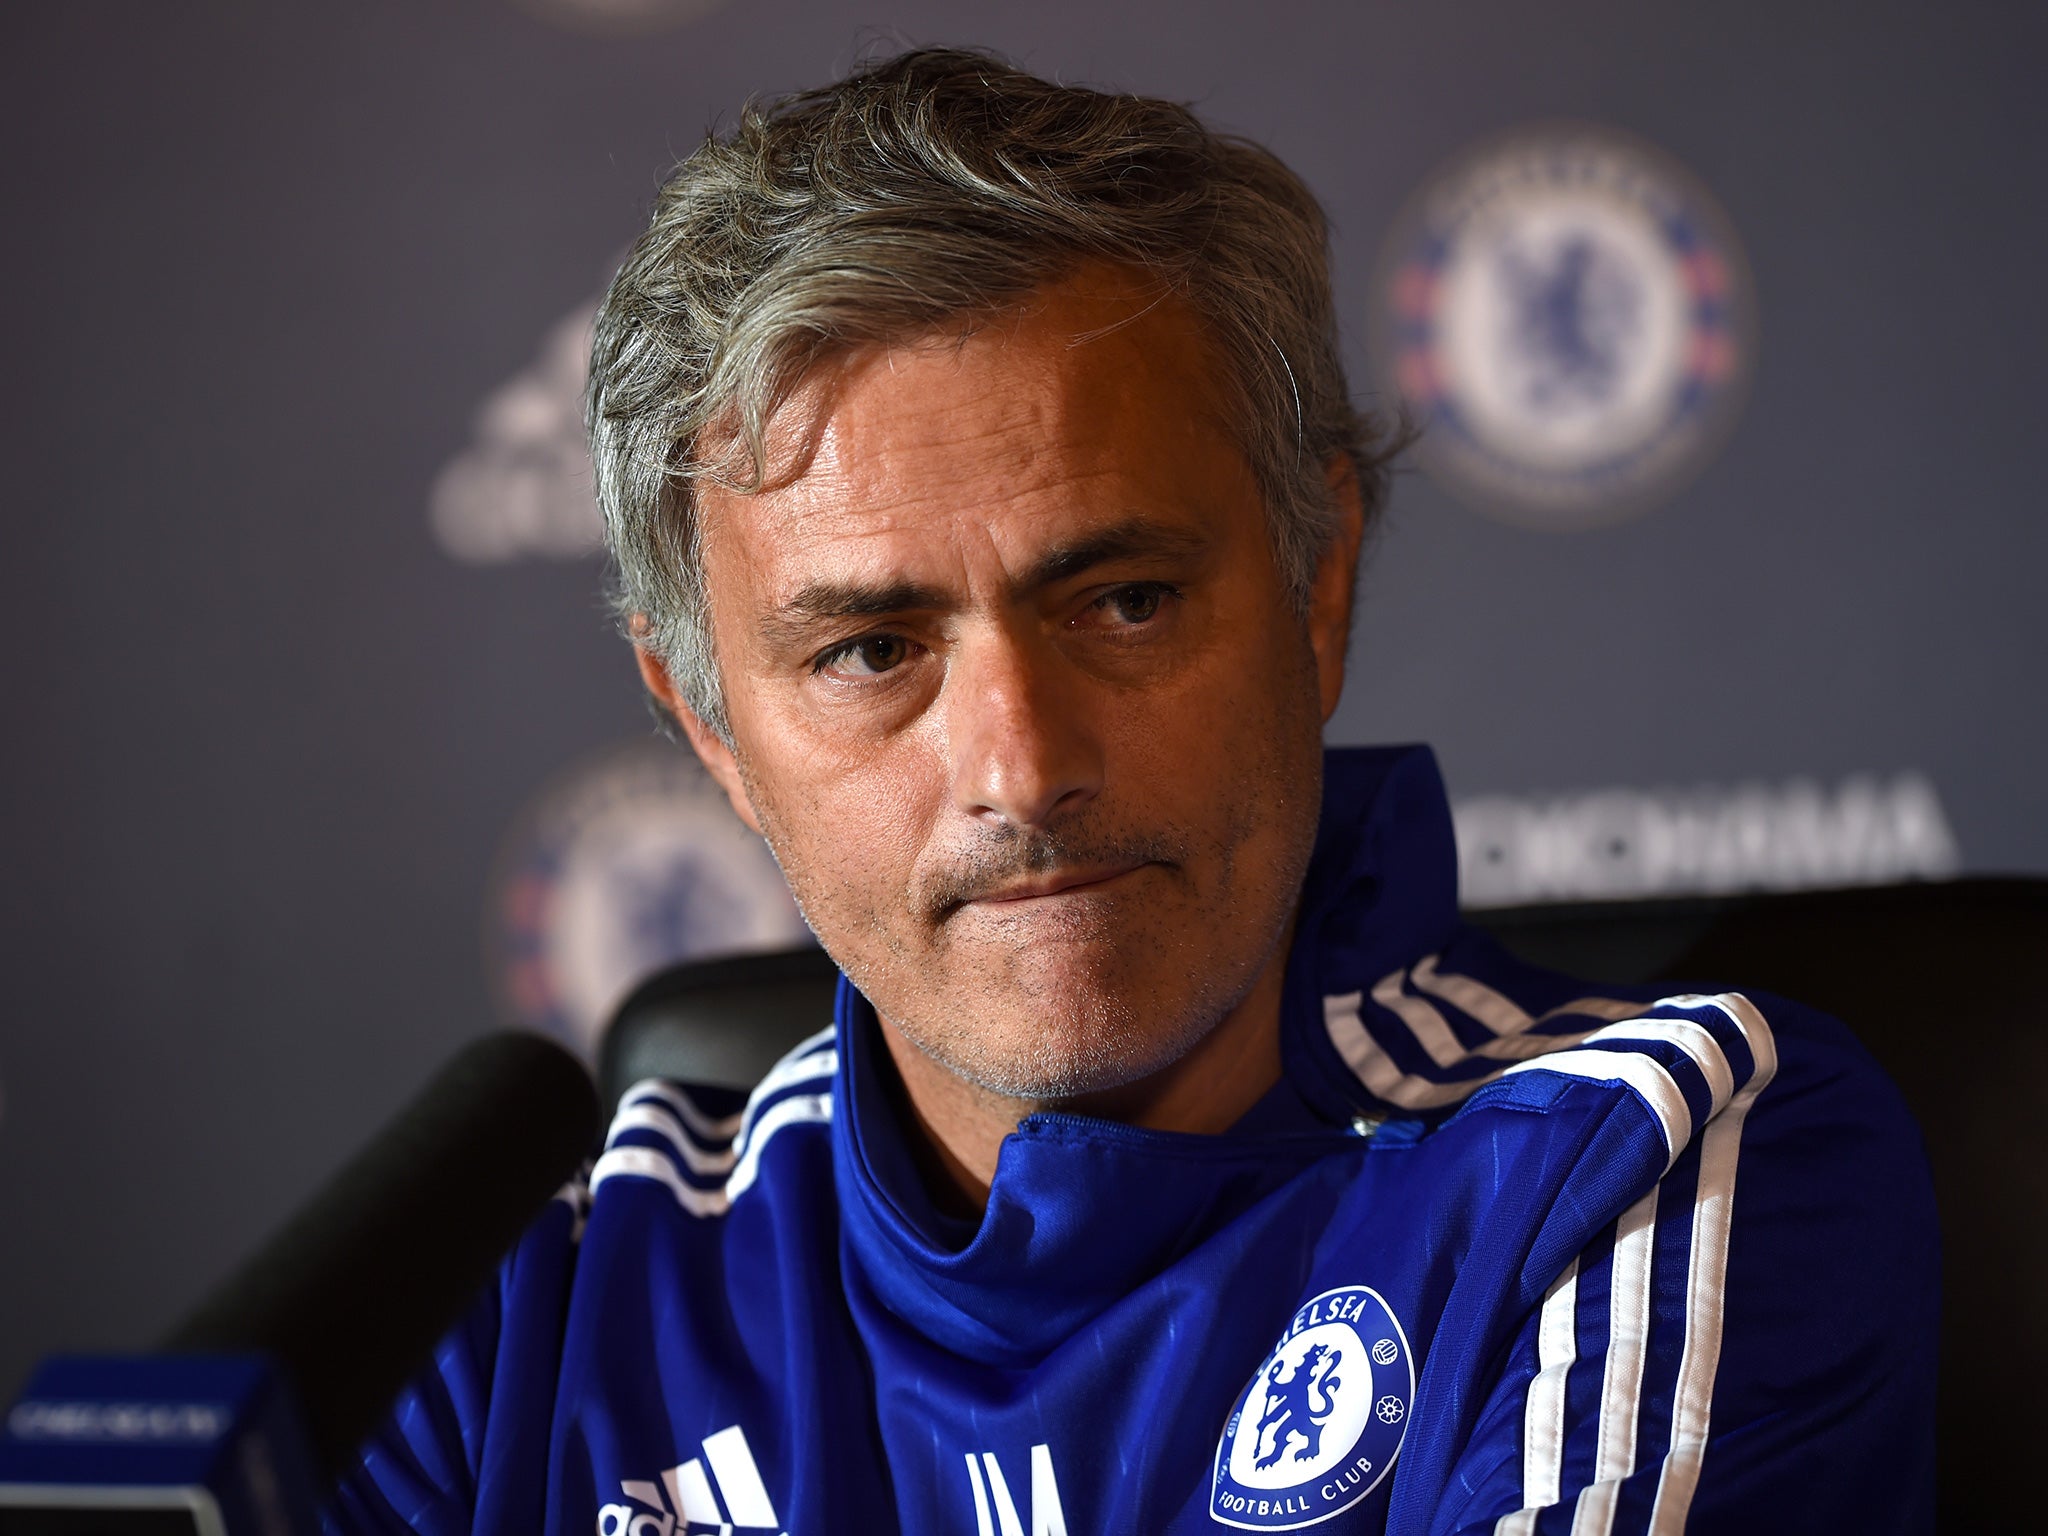 Jose Mourinho had to digest the news that Thibaut Courtois will be out for three months